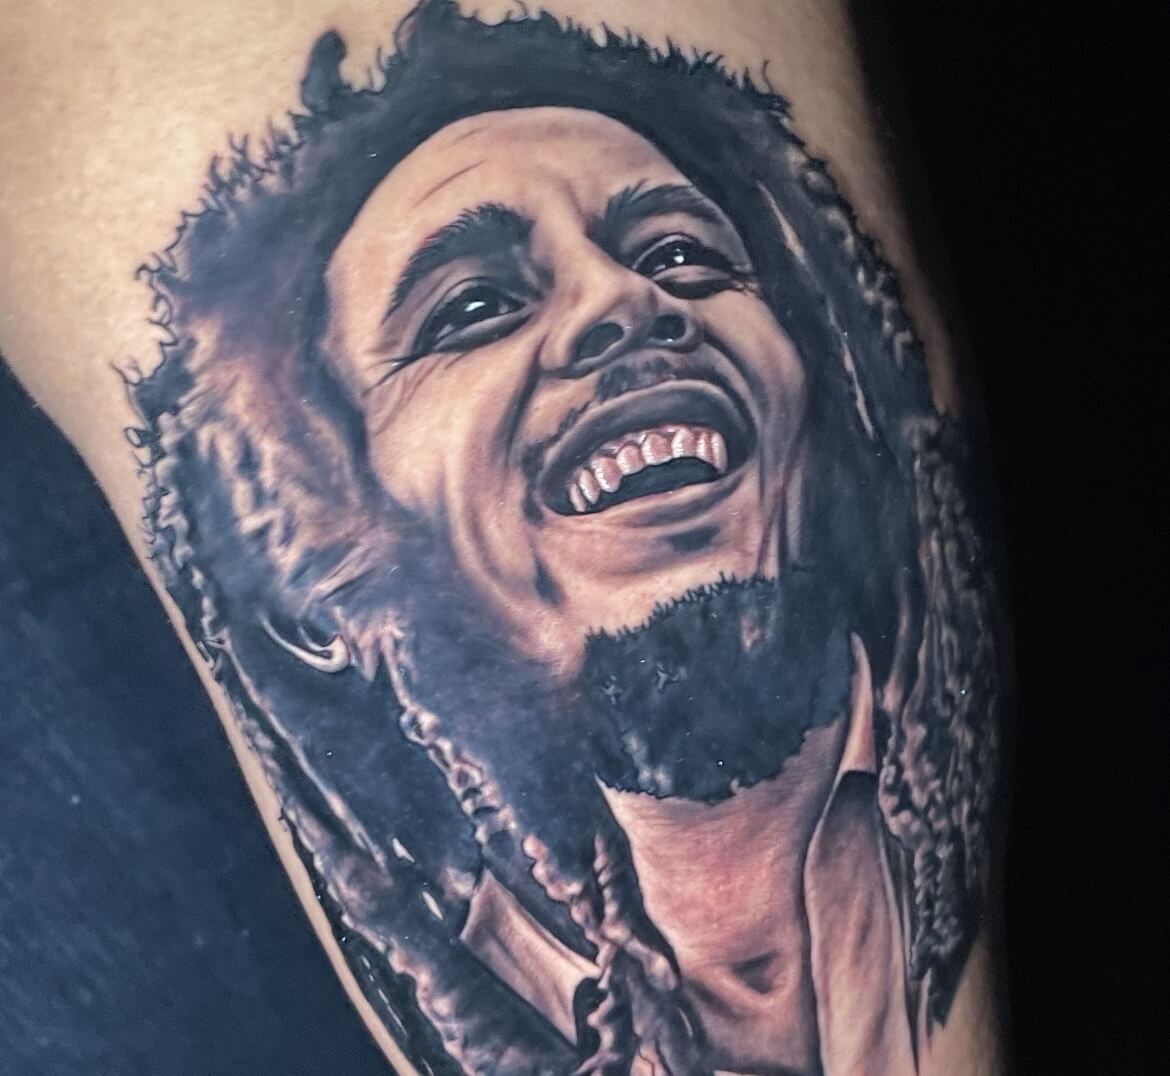 It's Supposed To Be Bob Marley | Tattoo Fails | Know Your Meme